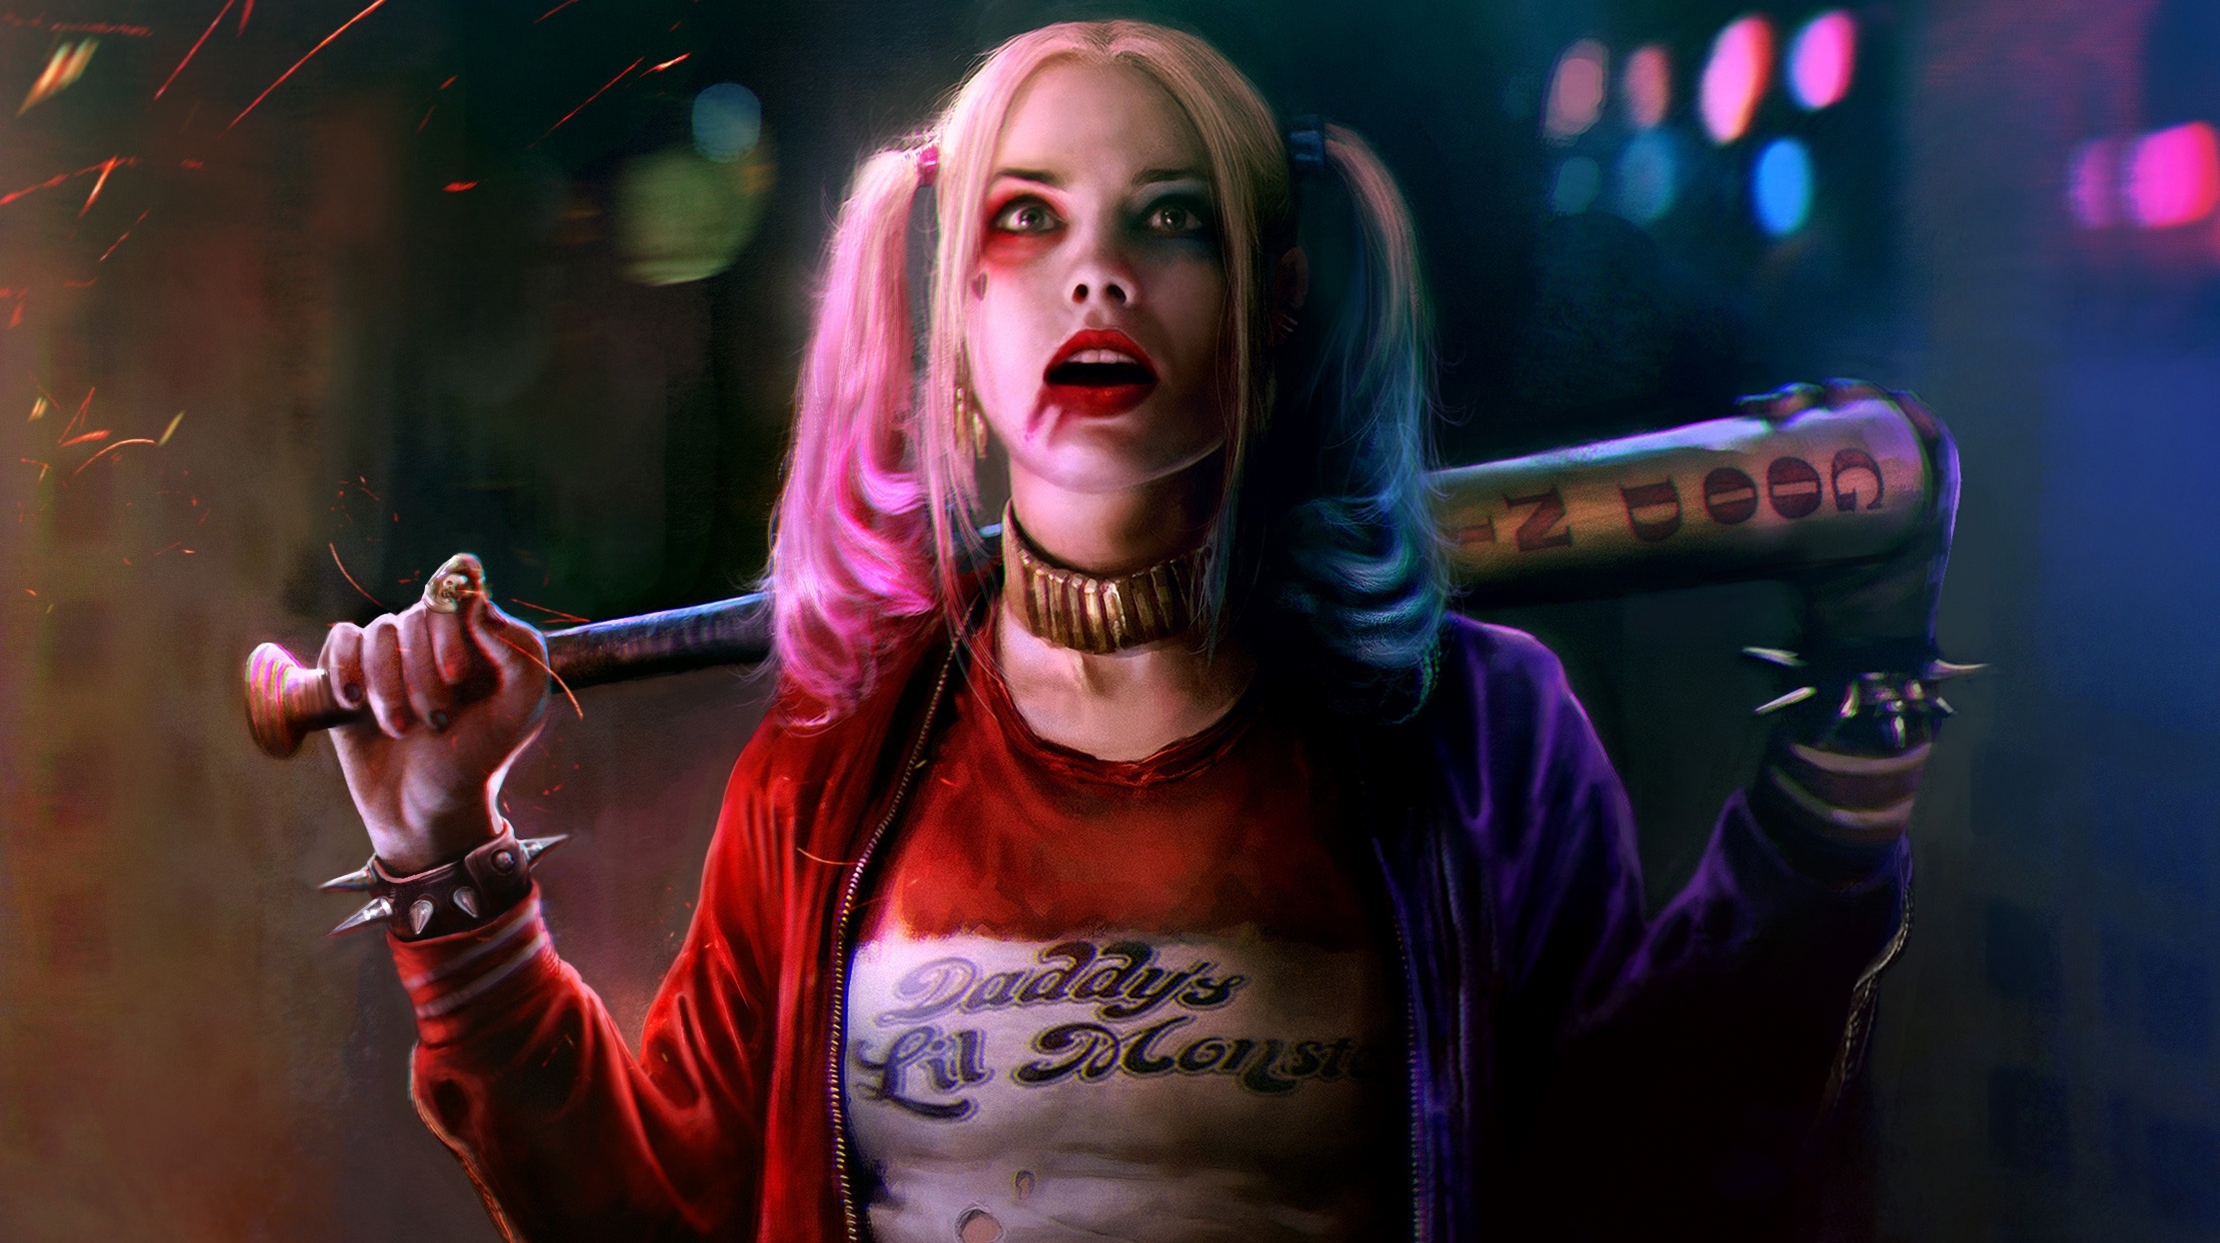 blonde, movie, margot robbie, dc comics, harley quinn, collar, suicide squad, baseball bat, spikes, two toned hair High Definition image